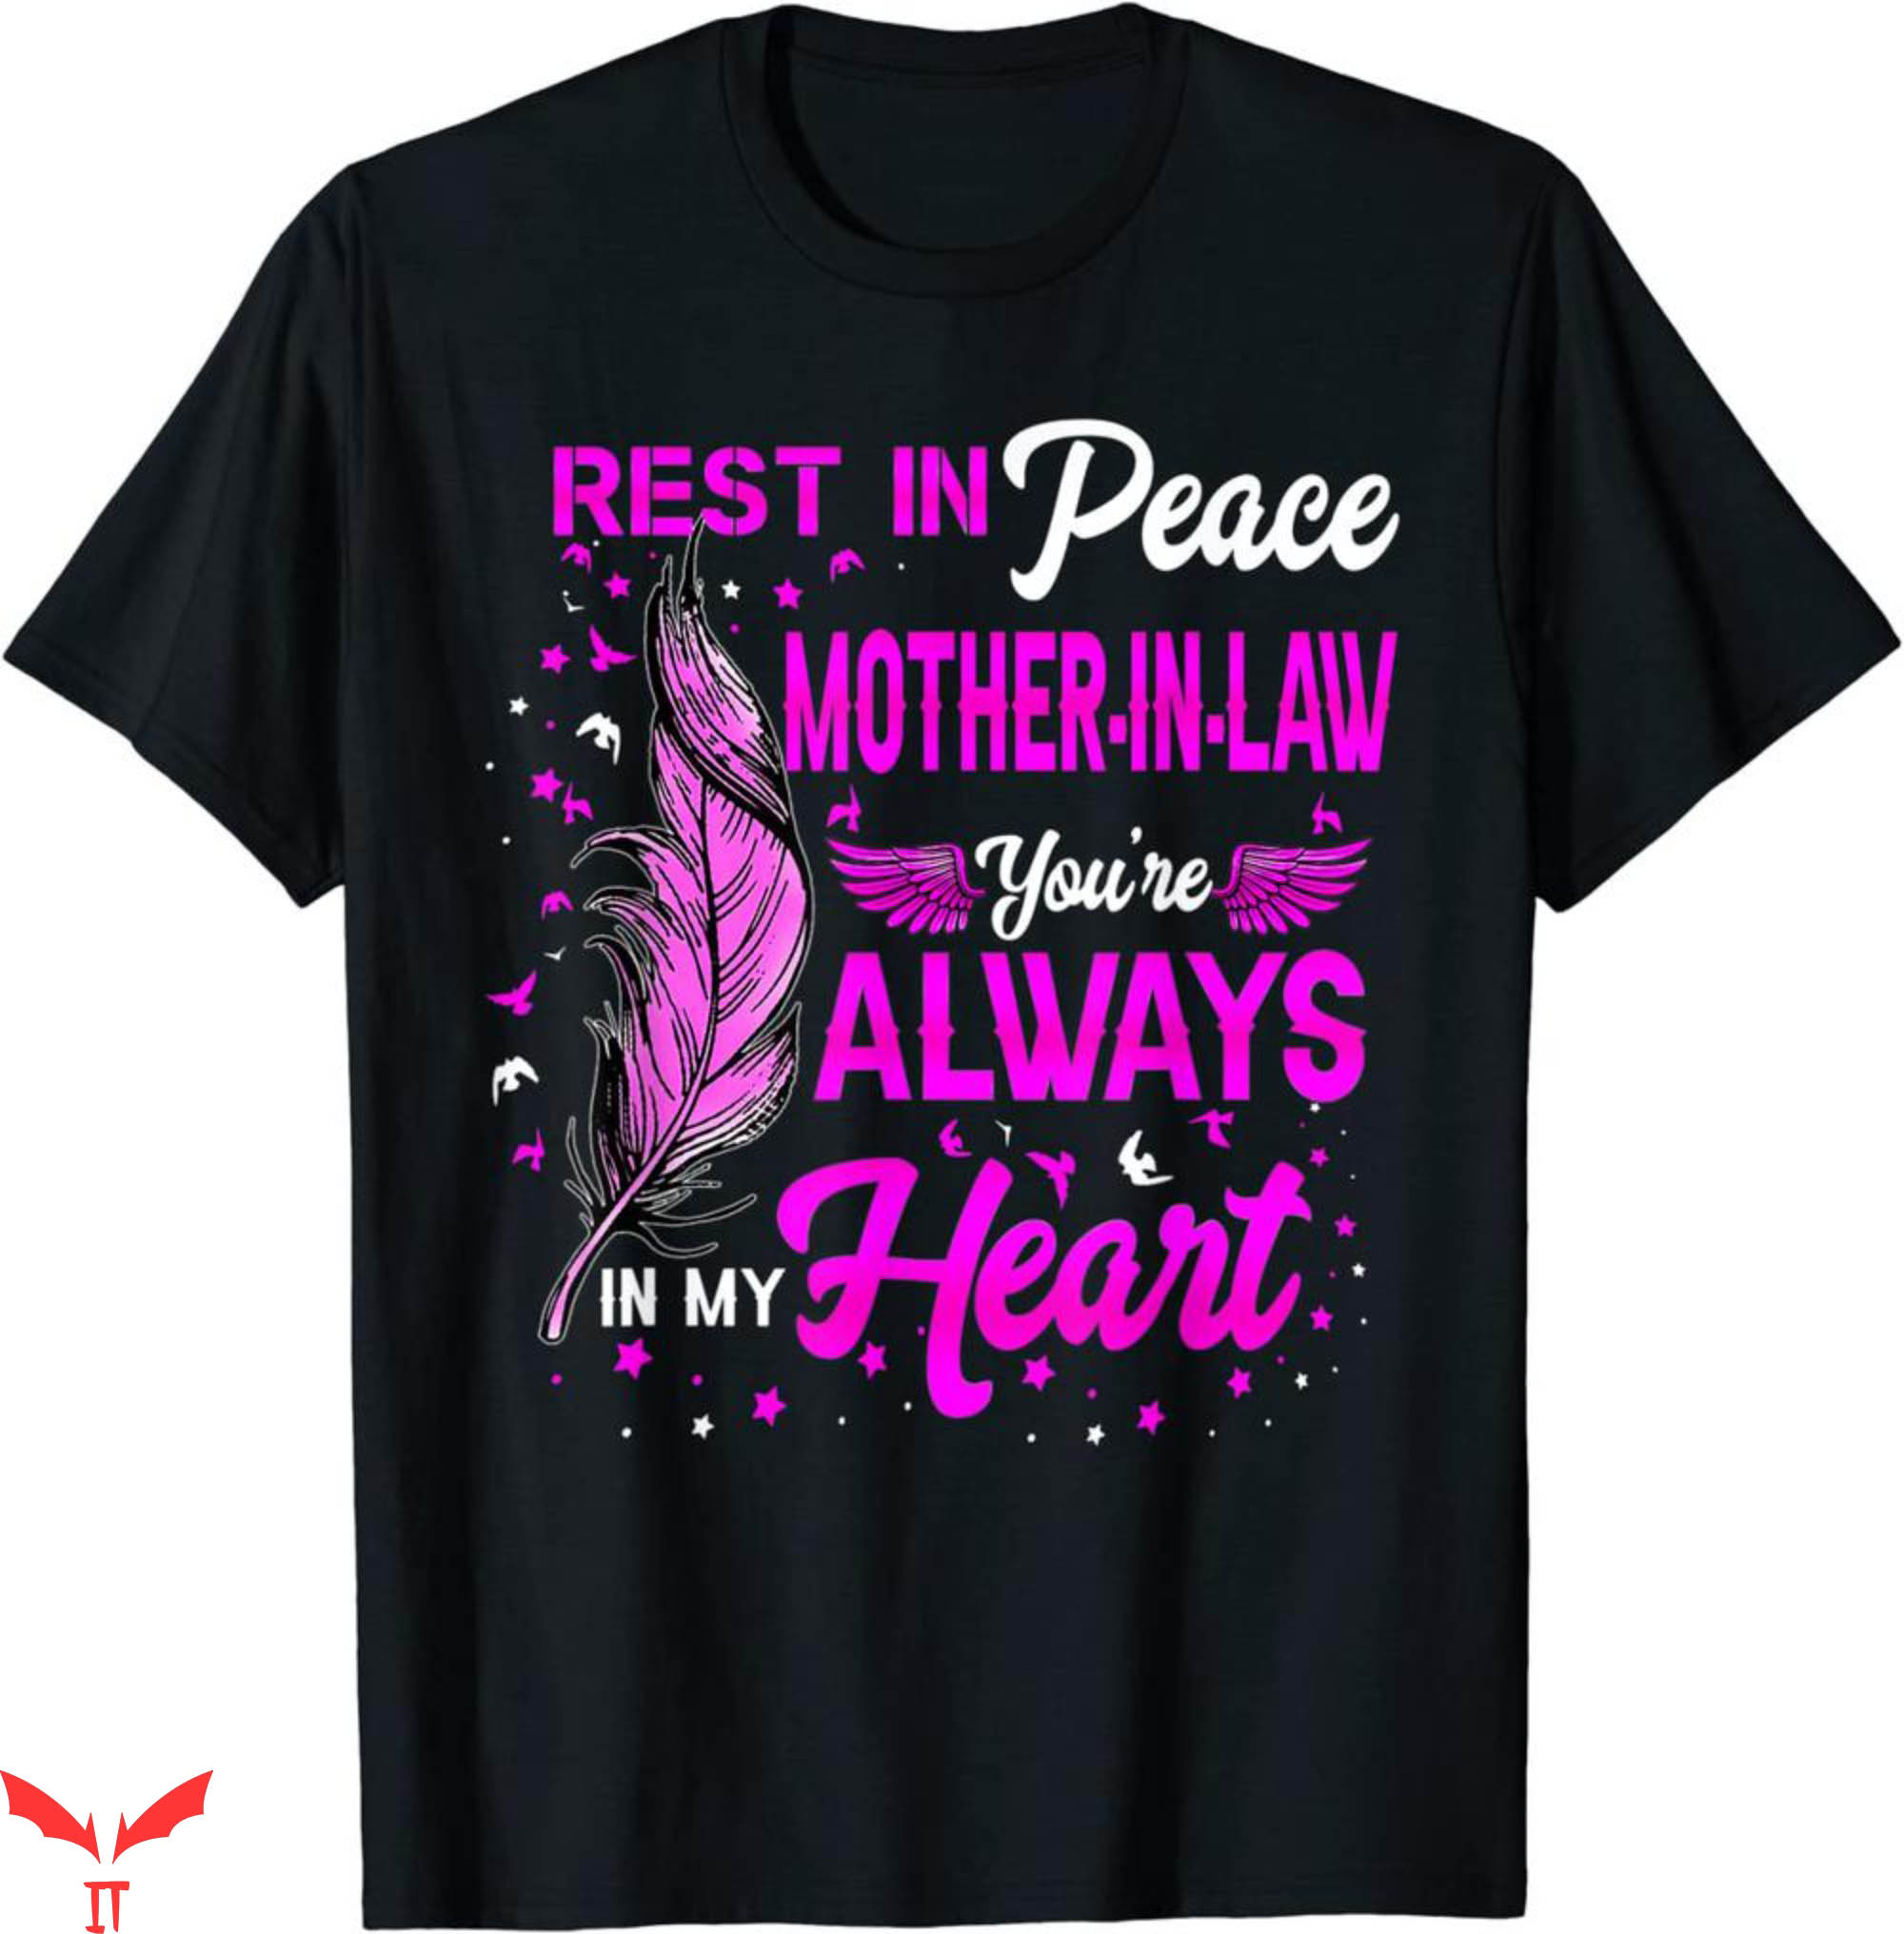 Rest In Peace T-Shirt Mother-In-Law Youre Always In My Heart